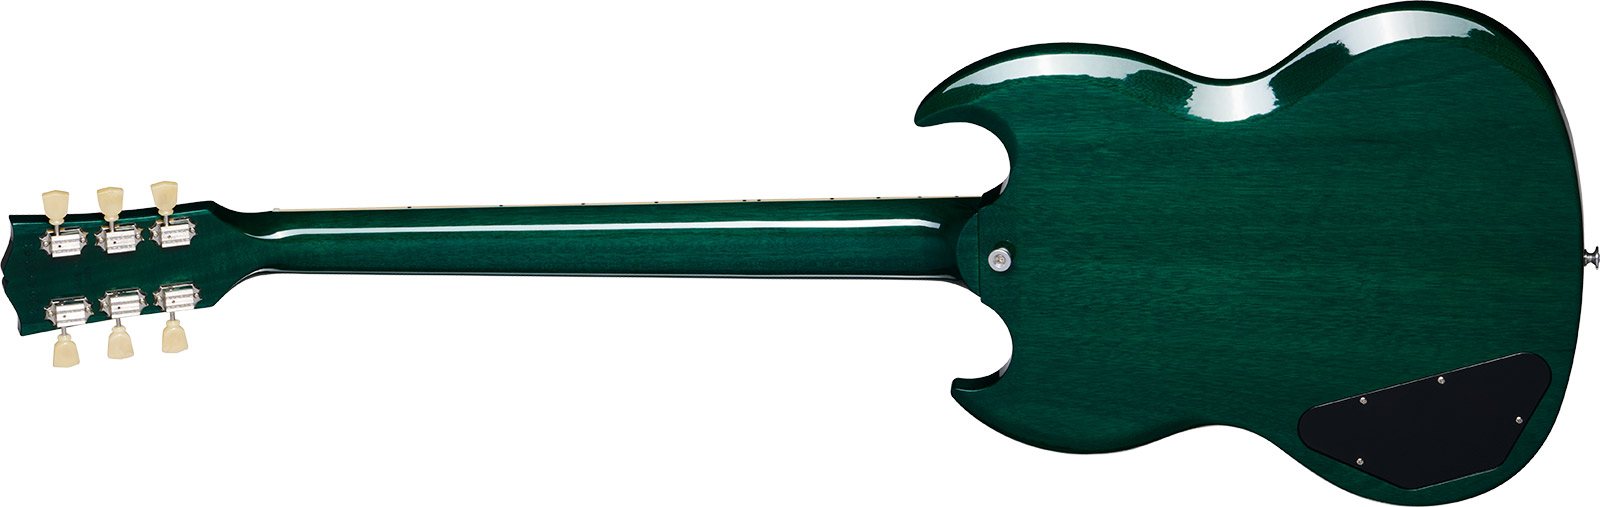 Gibson Sg Standard 1961 Custom Color 2h Ht Rw - Translucent Teal - Double cut electric guitar - Variation 1